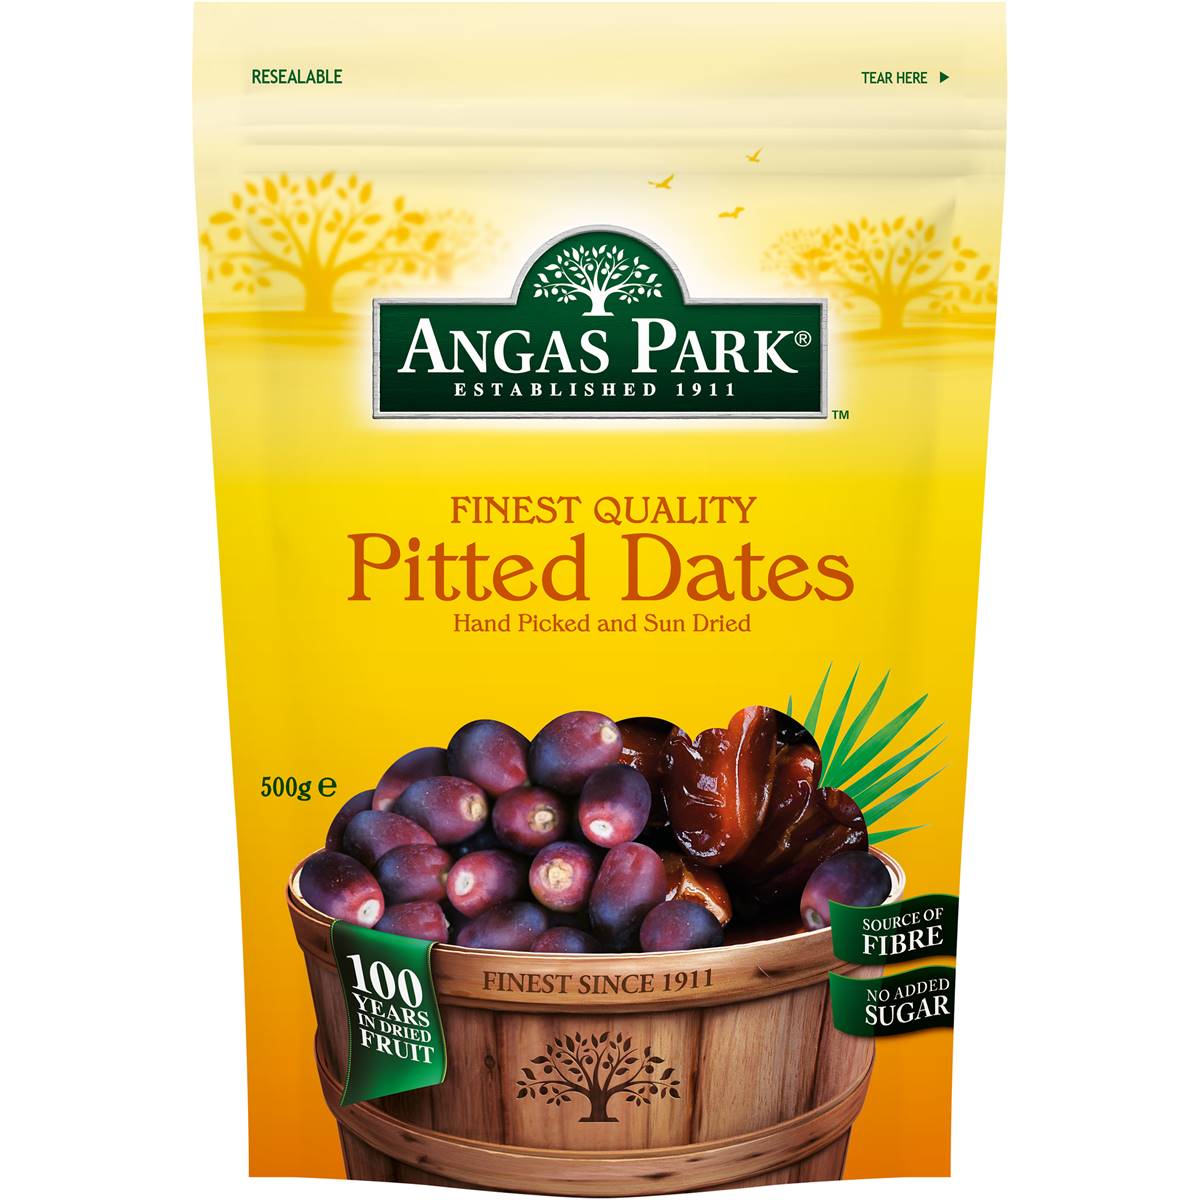 Calories in Angas Park Pitted Dates